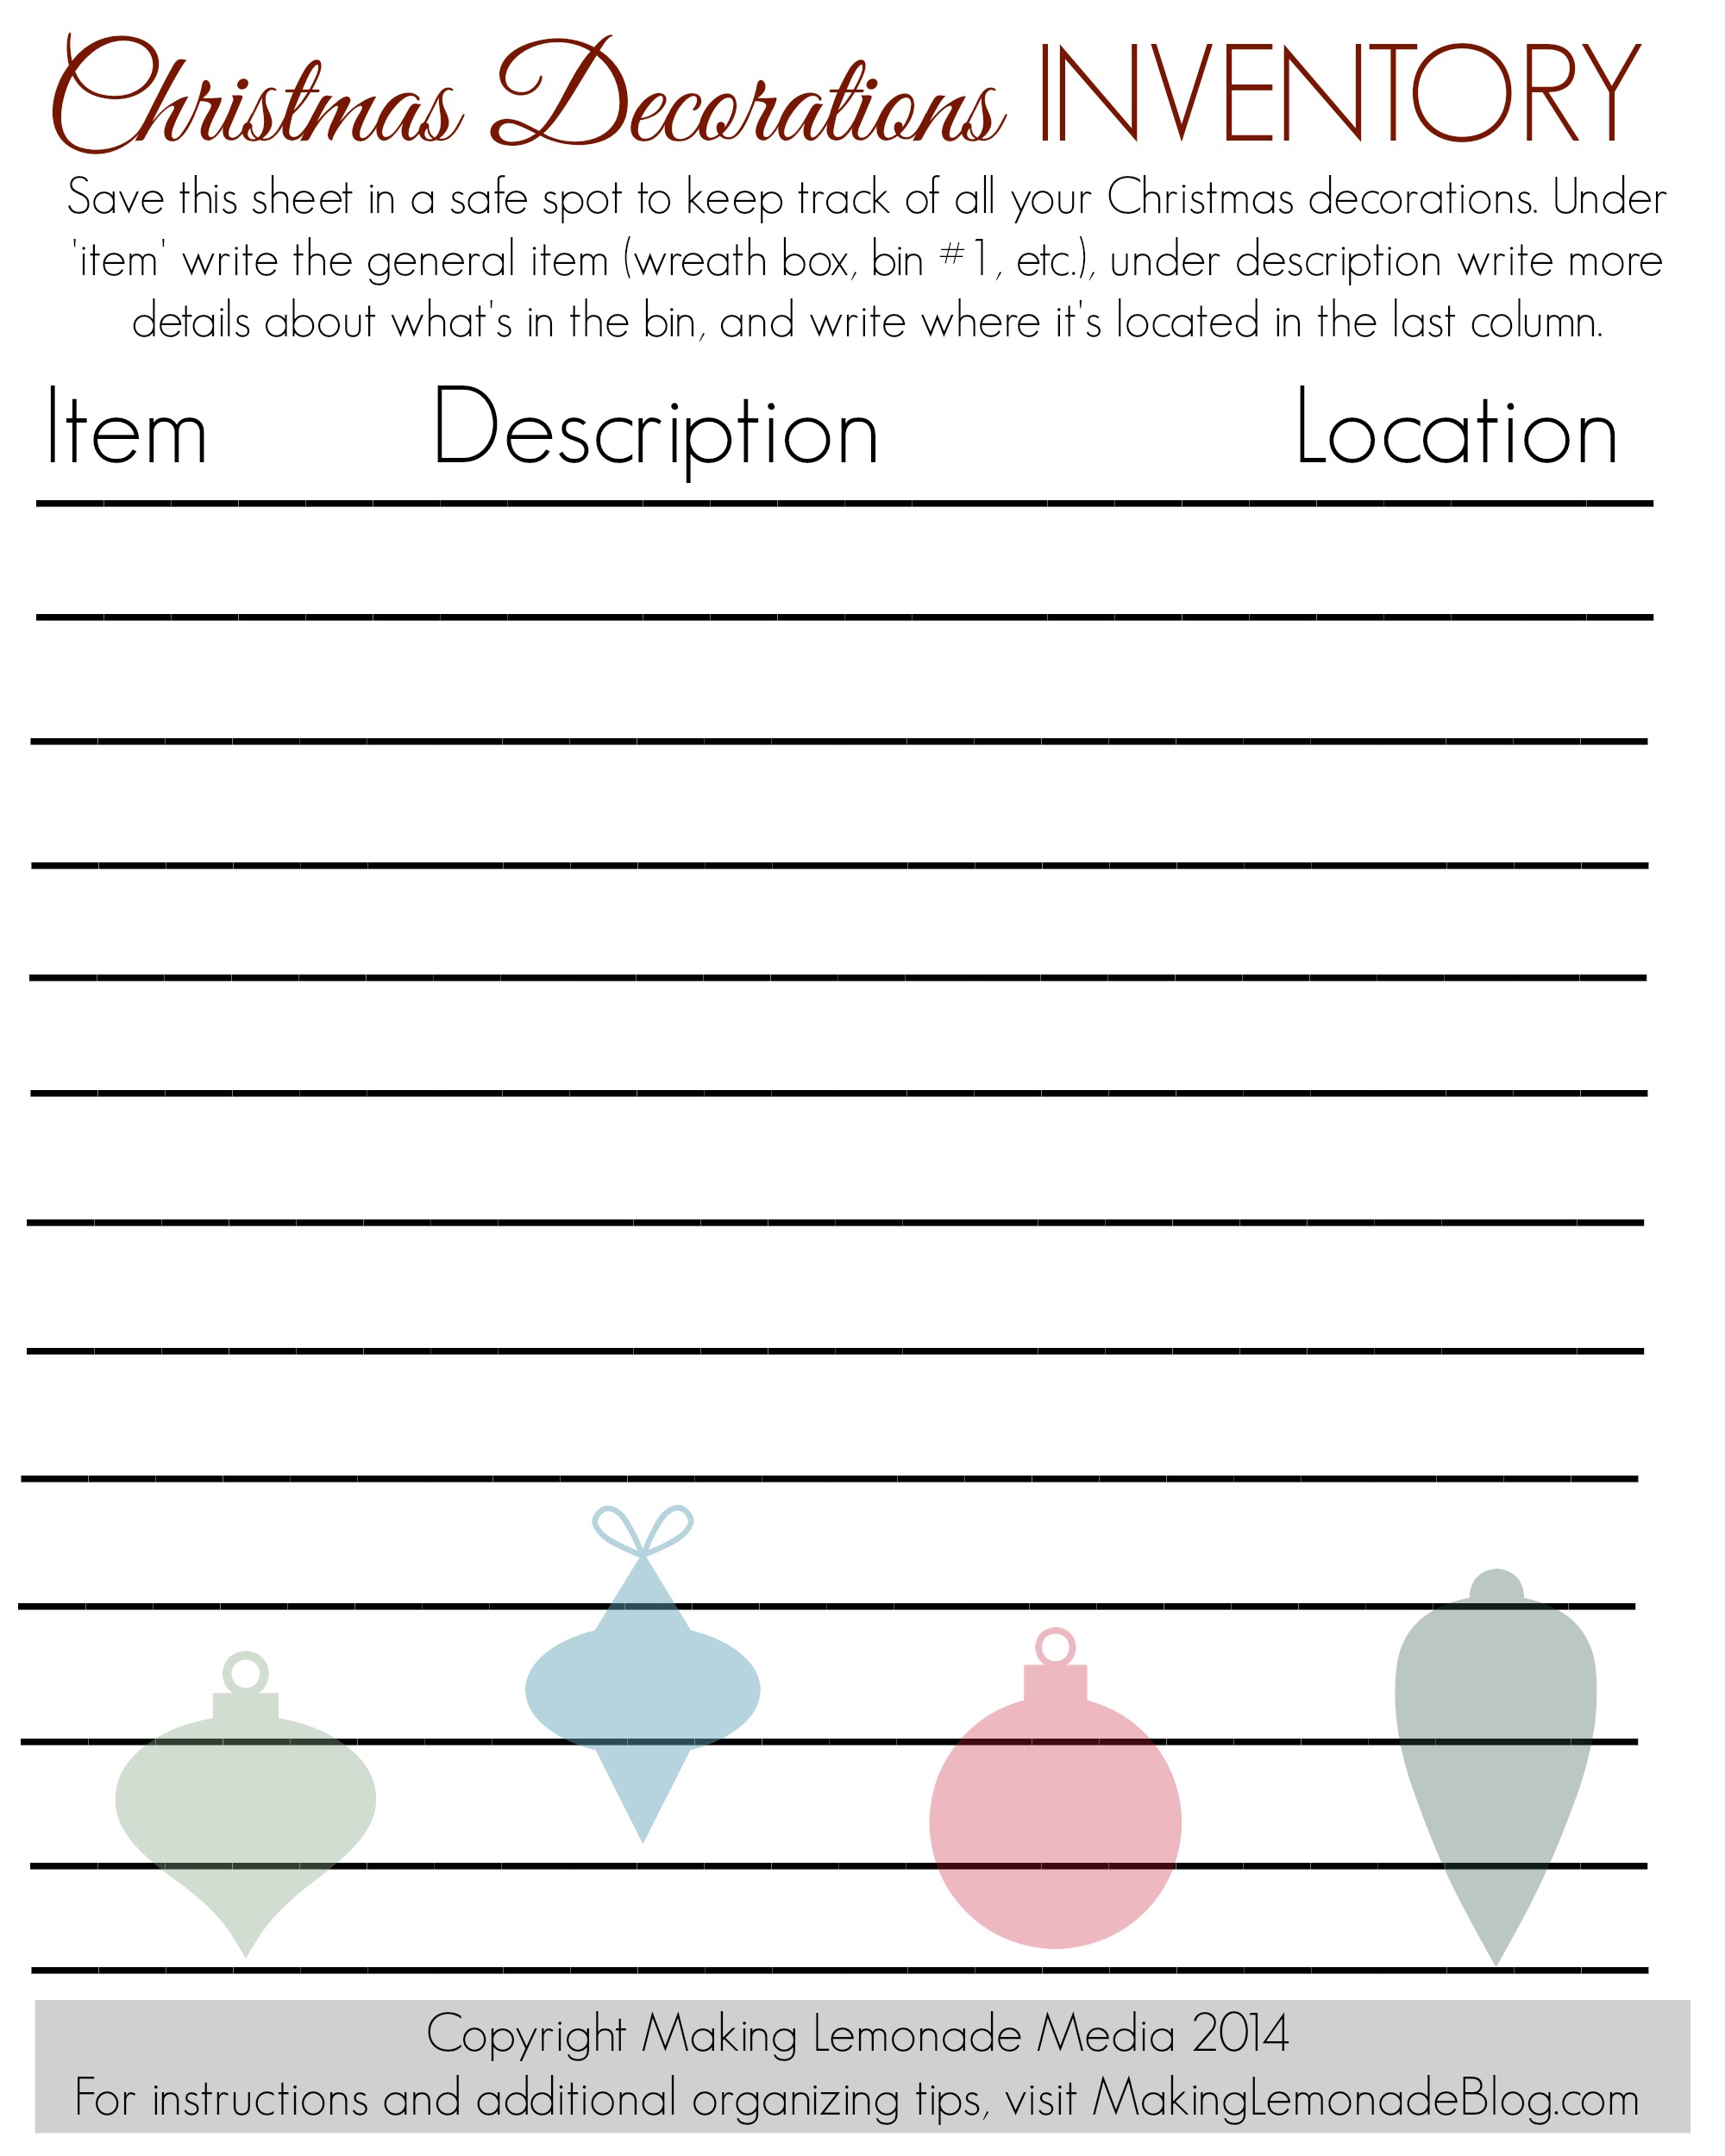 Free Printable Christmas Decorations Inventory and Christmas Organization Tips!